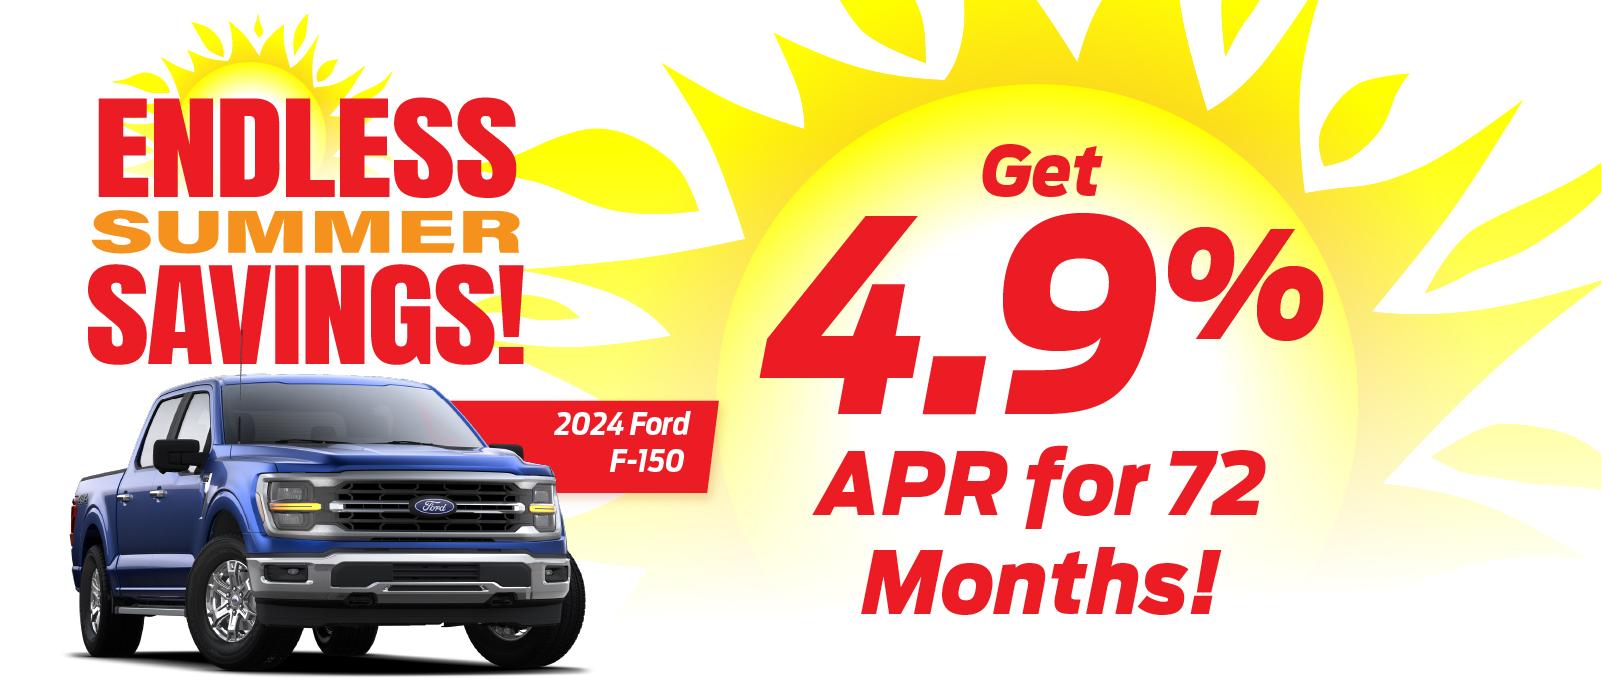 Shop 4.9% for 72 Months on New 2024 Ford F-150!🔥